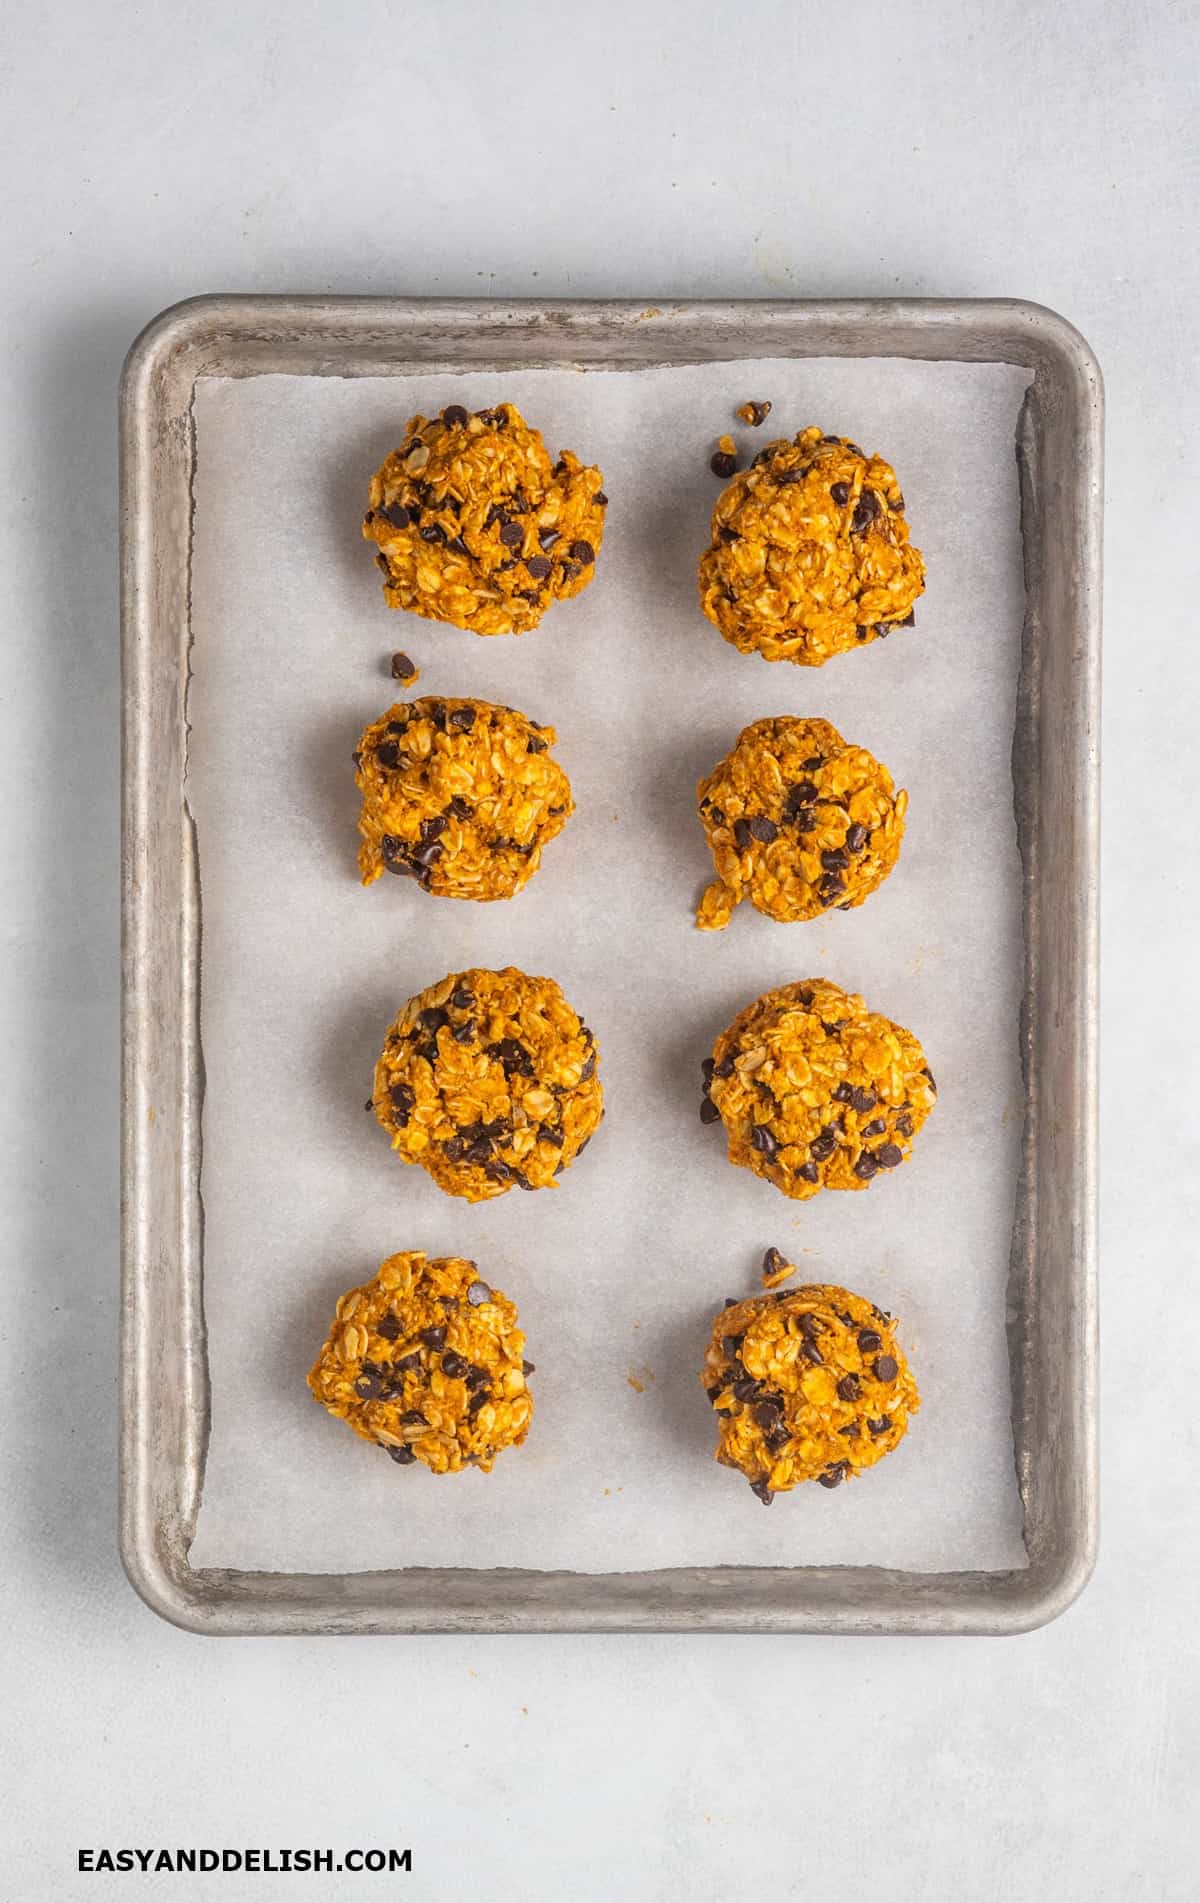 balls of the batter in a sheet pan.